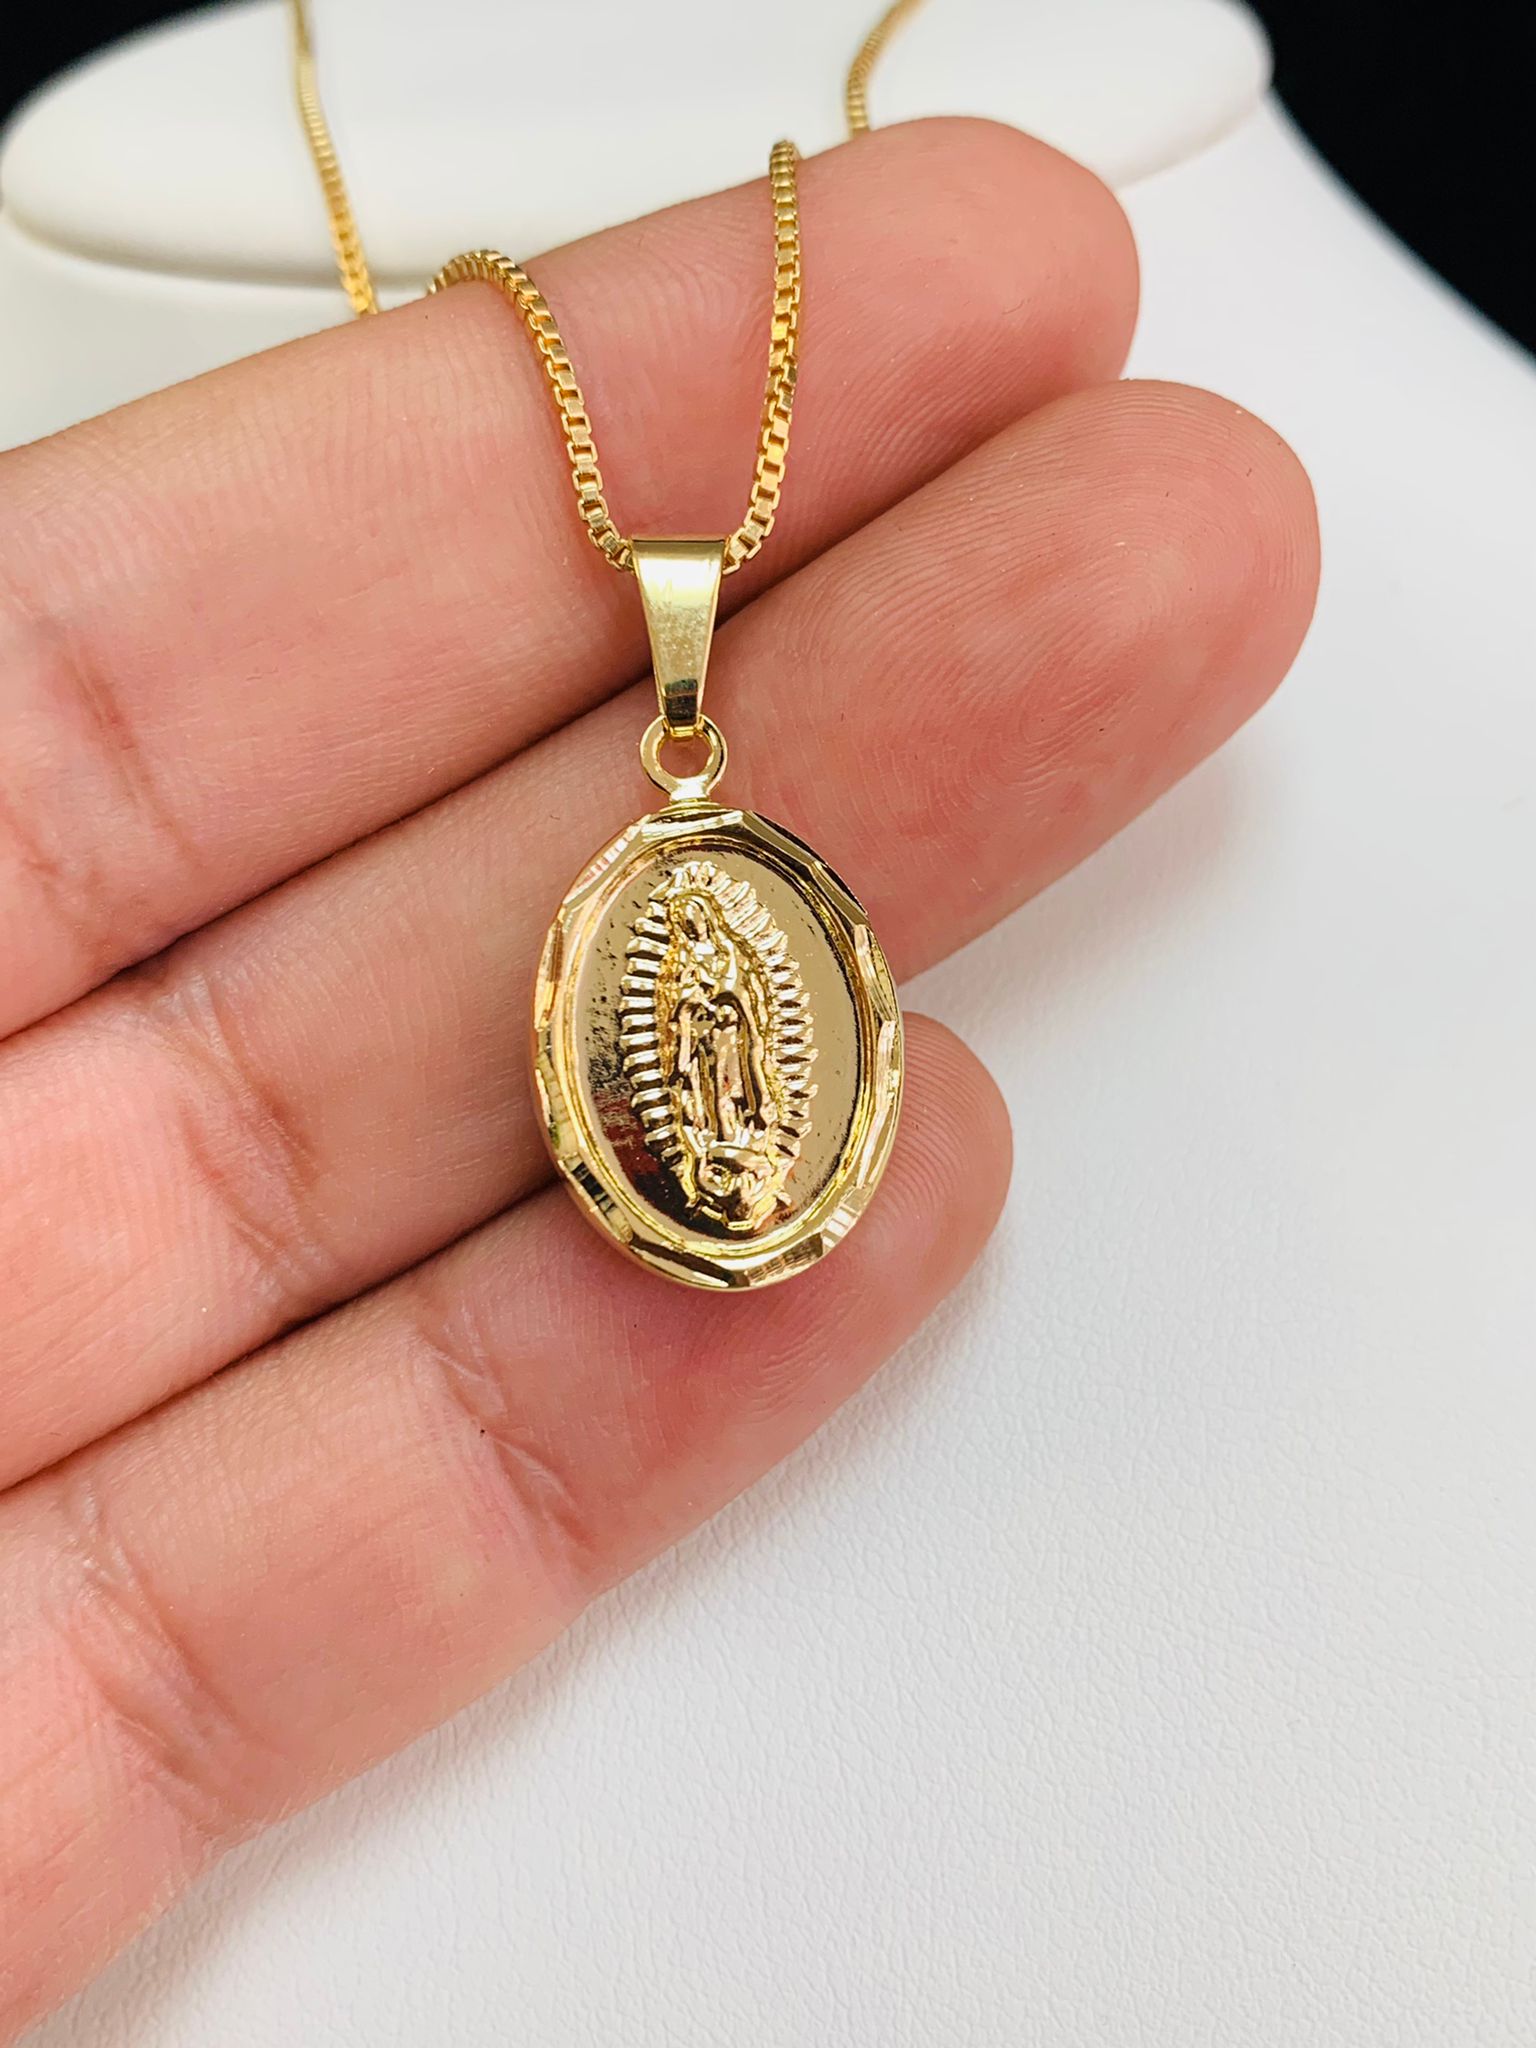 Virgen de Guadalupe Necklace in Gold Filled All Yellow Guadalupe